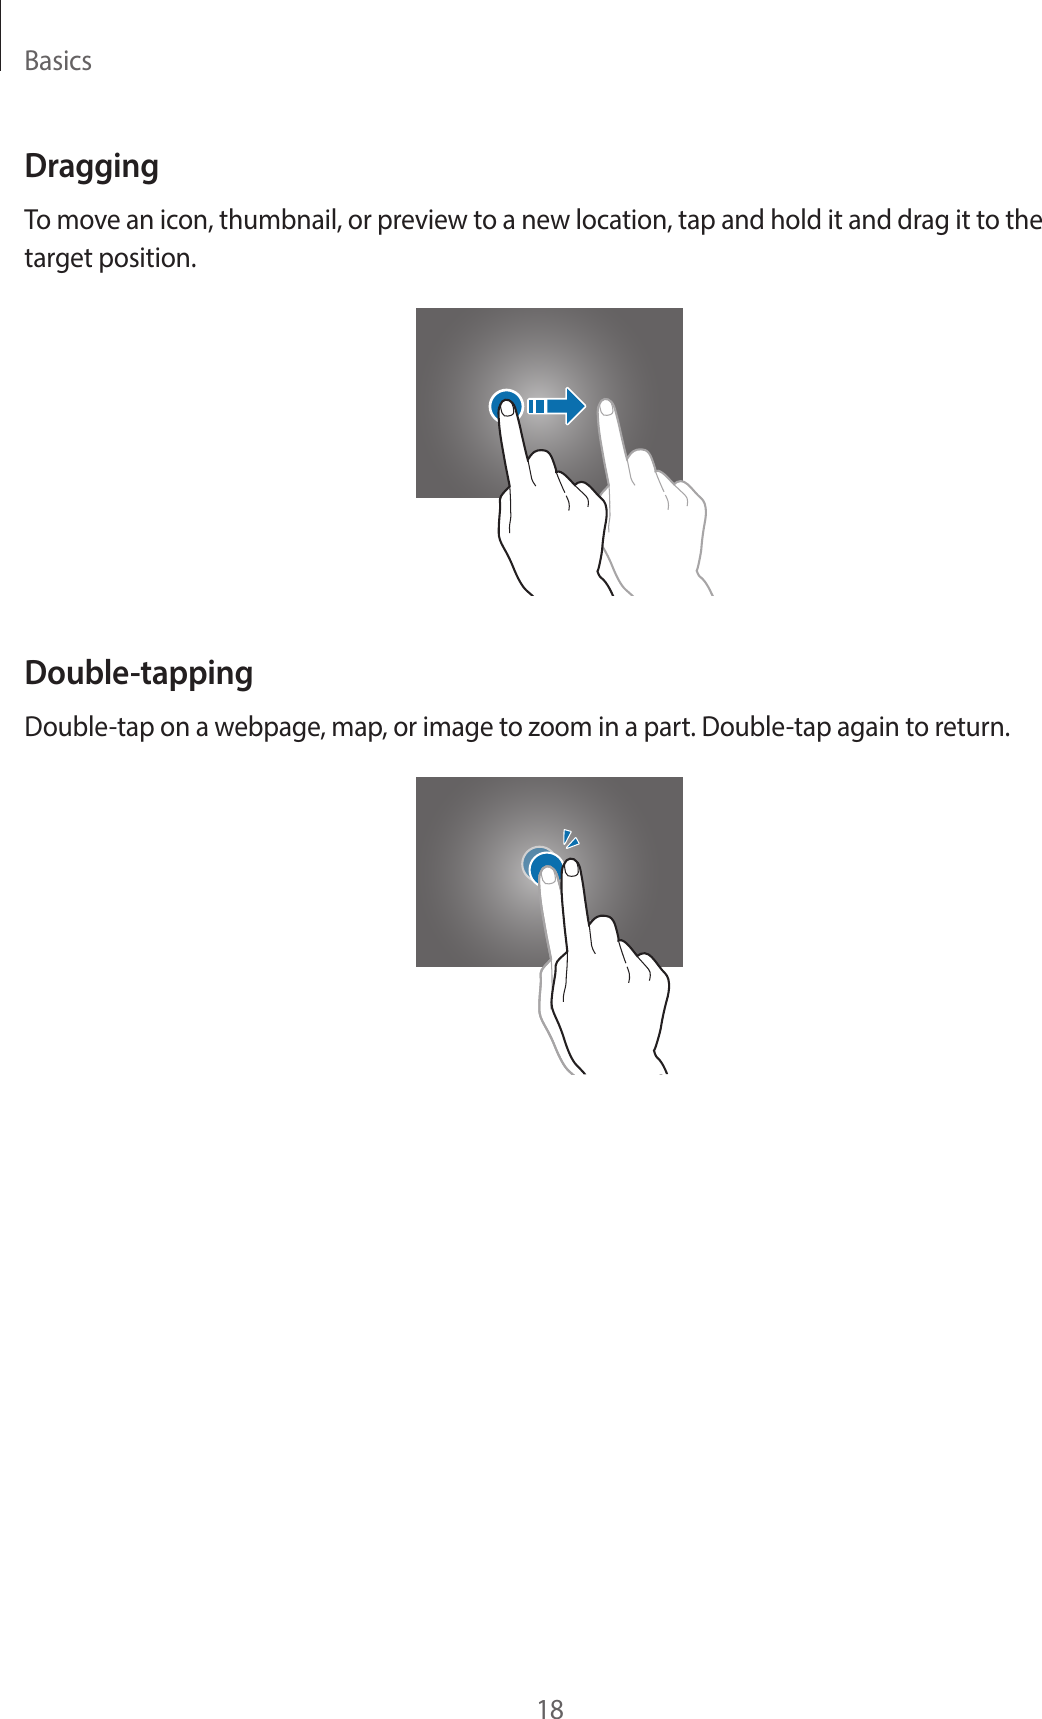 Basics18DraggingTo move an icon, thumbnail, or preview to a new location, tap and hold it and drag it to the target position.Double-tappingDouble-tap on a webpage, map, or image to zoom in a part. Double-tap again to return.